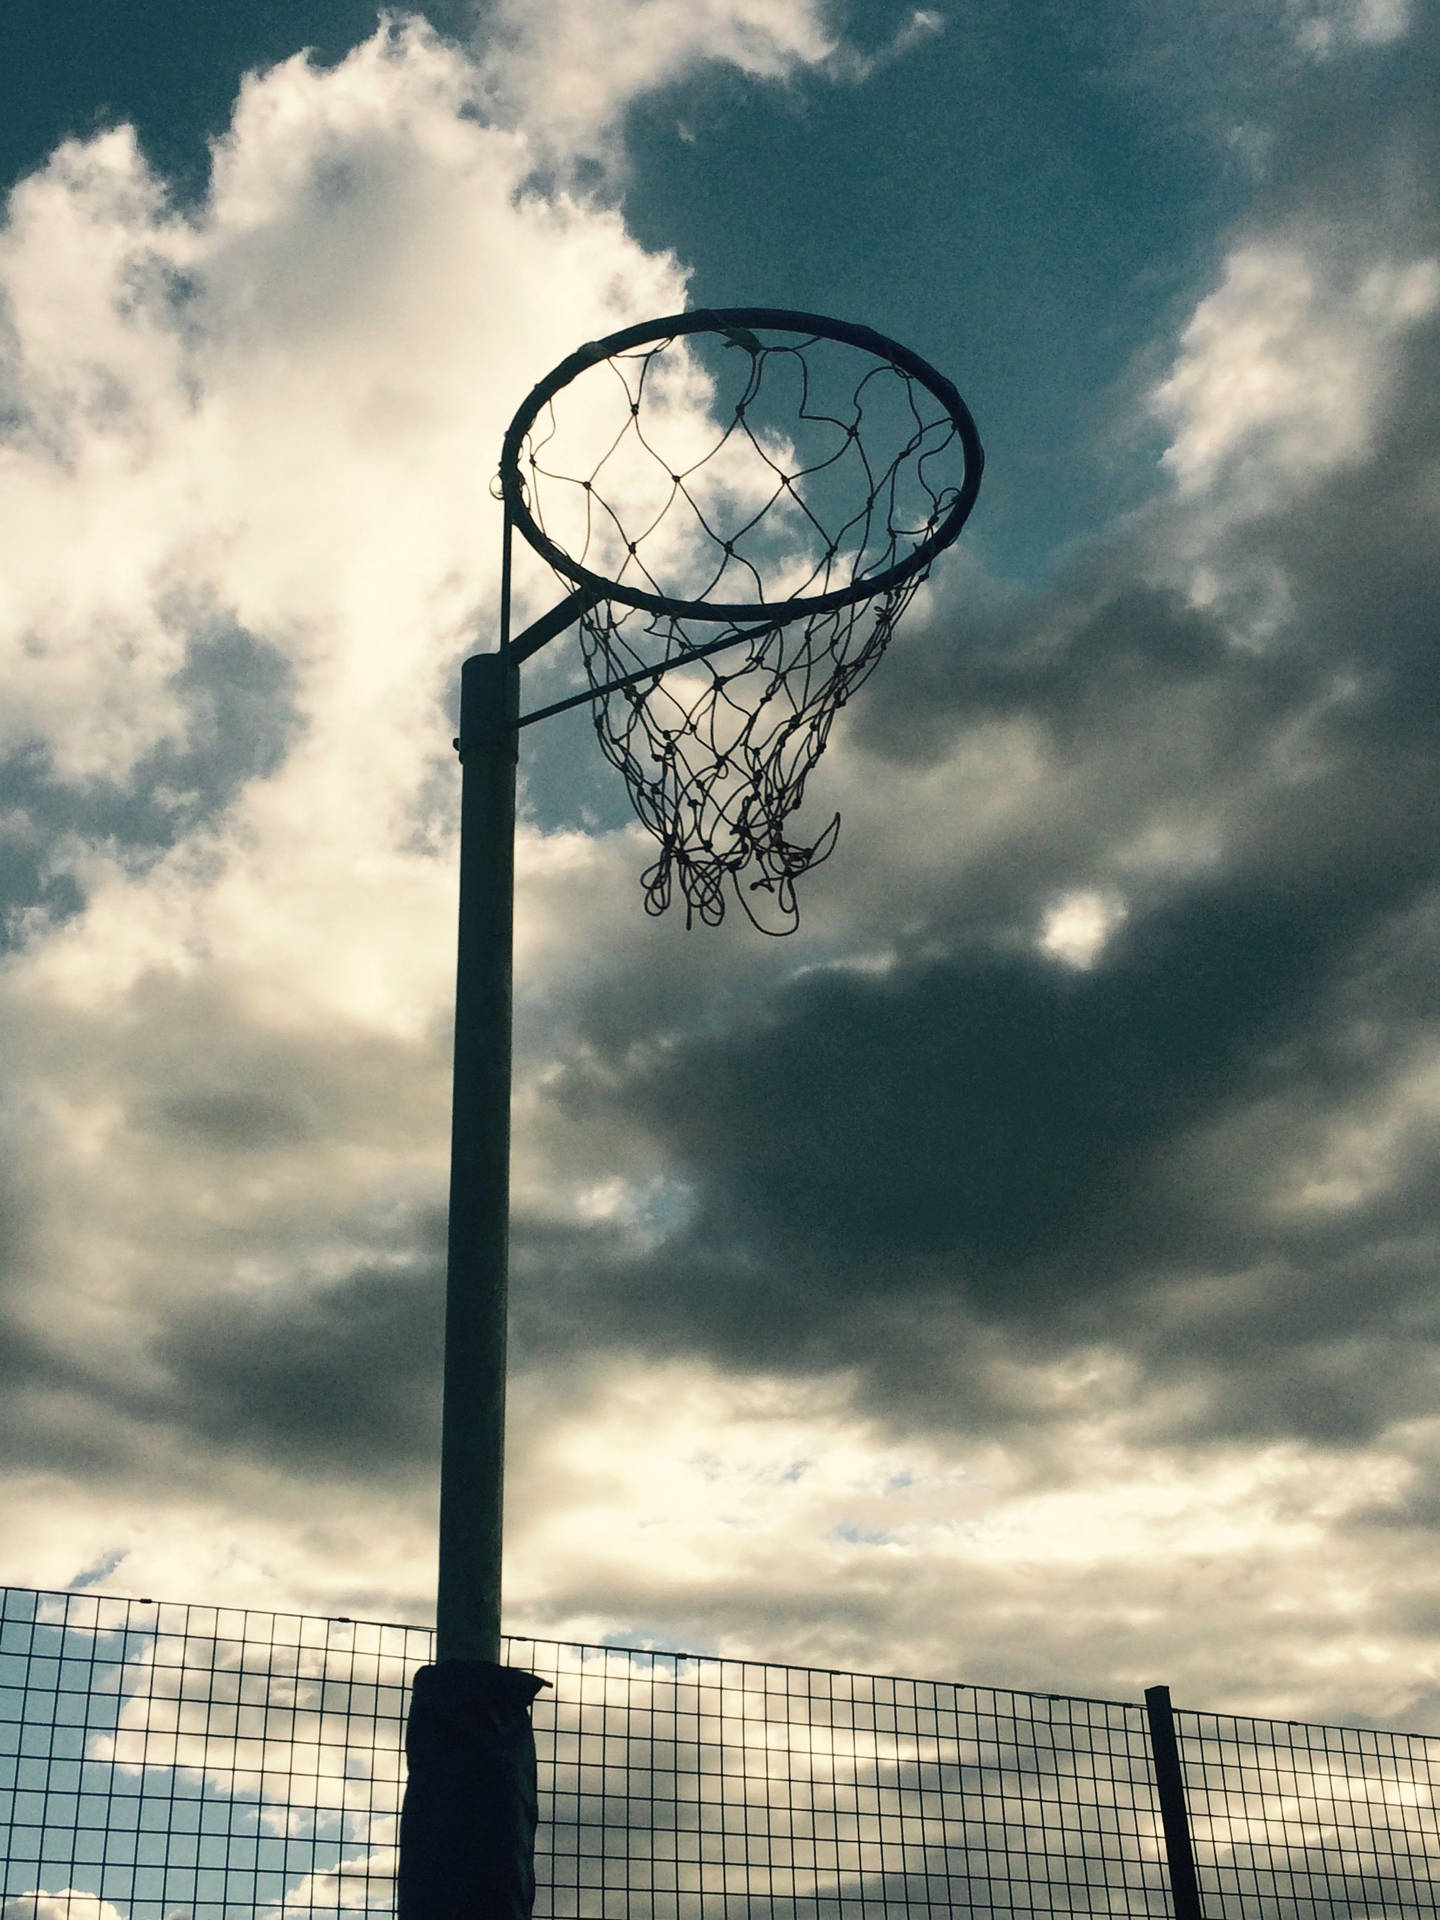 Victory at Her Fingertips – A Netball Player Aiming for the Hoop on an Outdoor Court Wallpaper